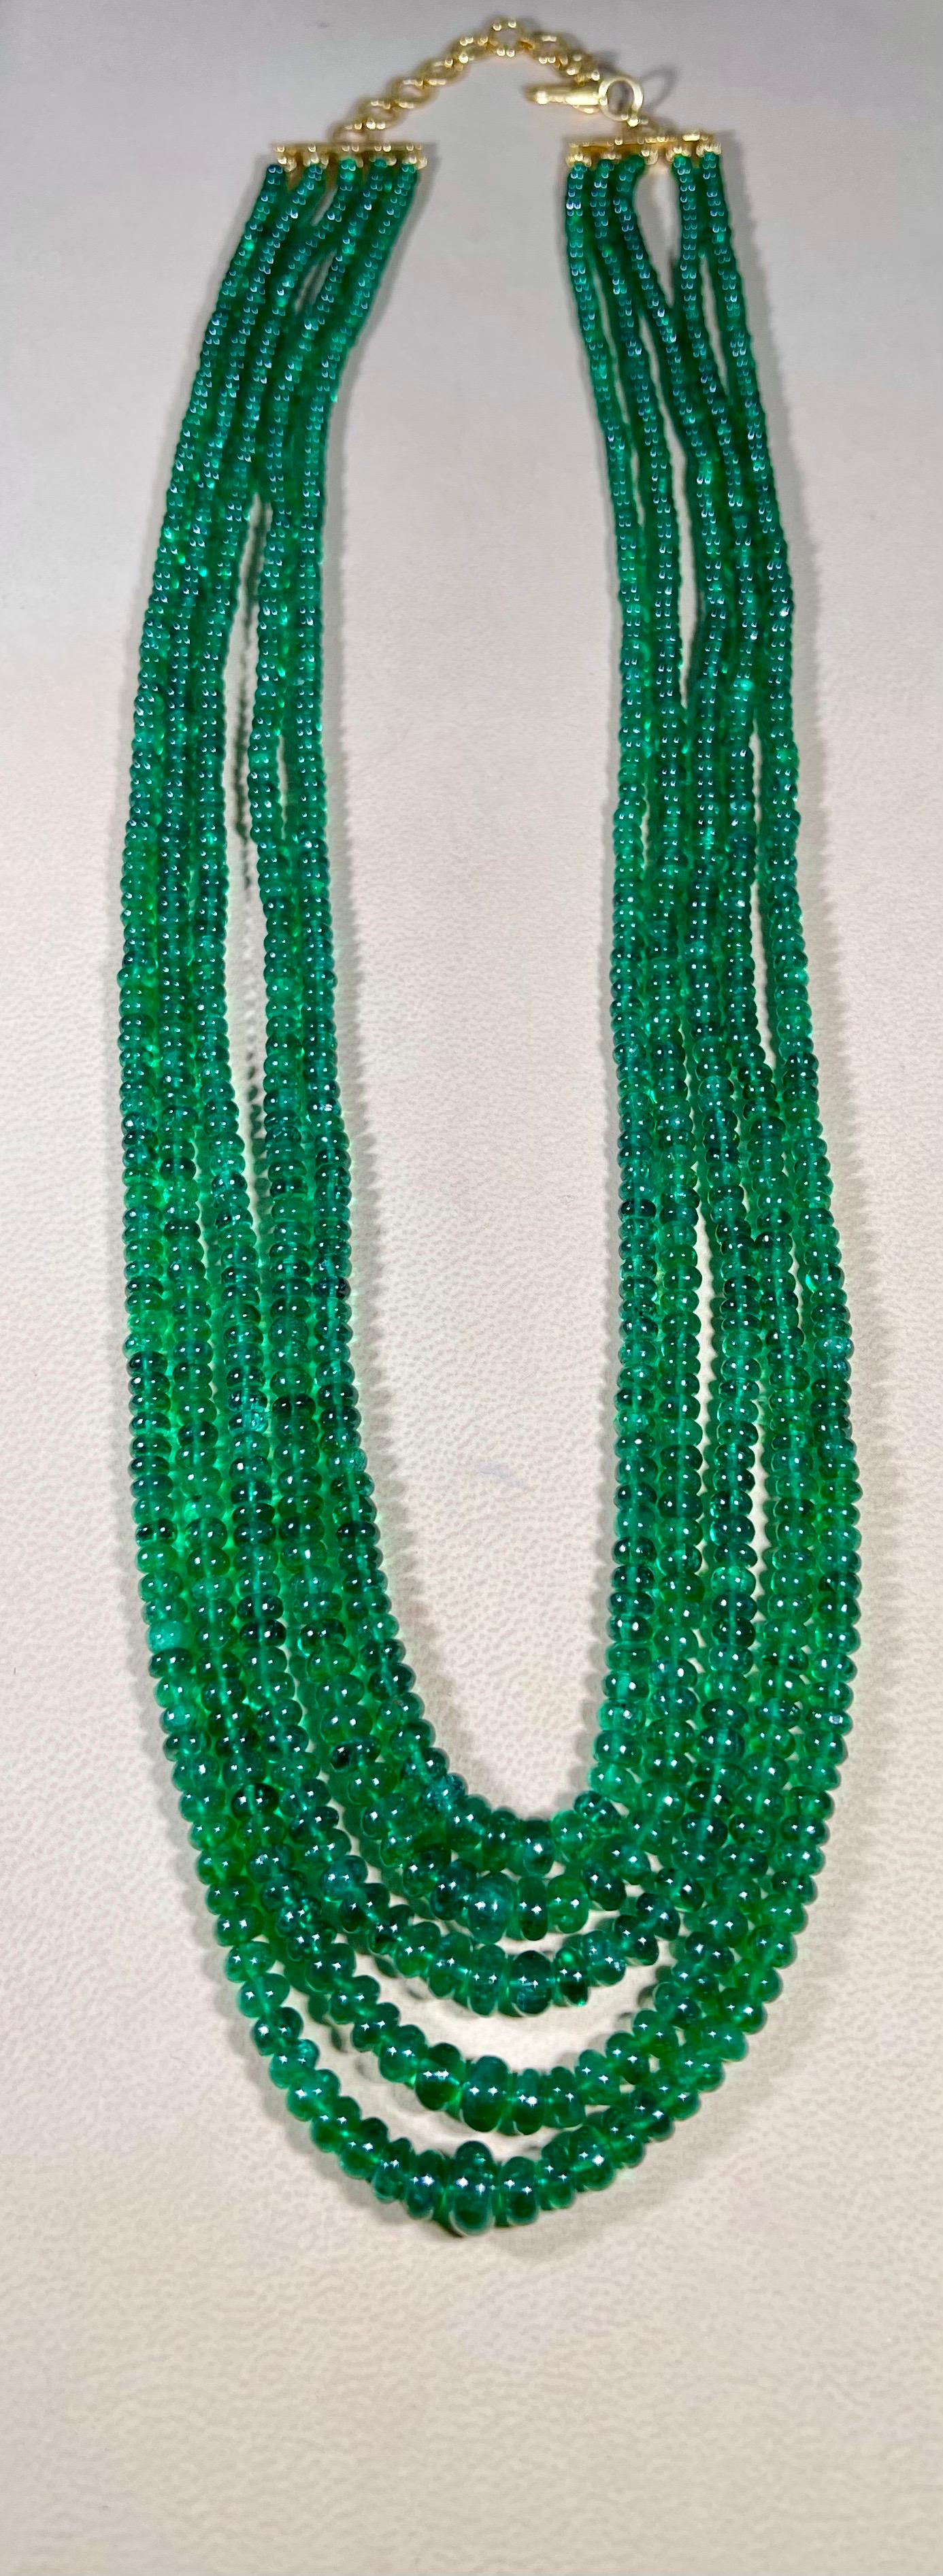 300ct Fine Emerald Beads 5 Line Necklace with 14 kt Yellow Gold Clasp Adjustable For Sale 8